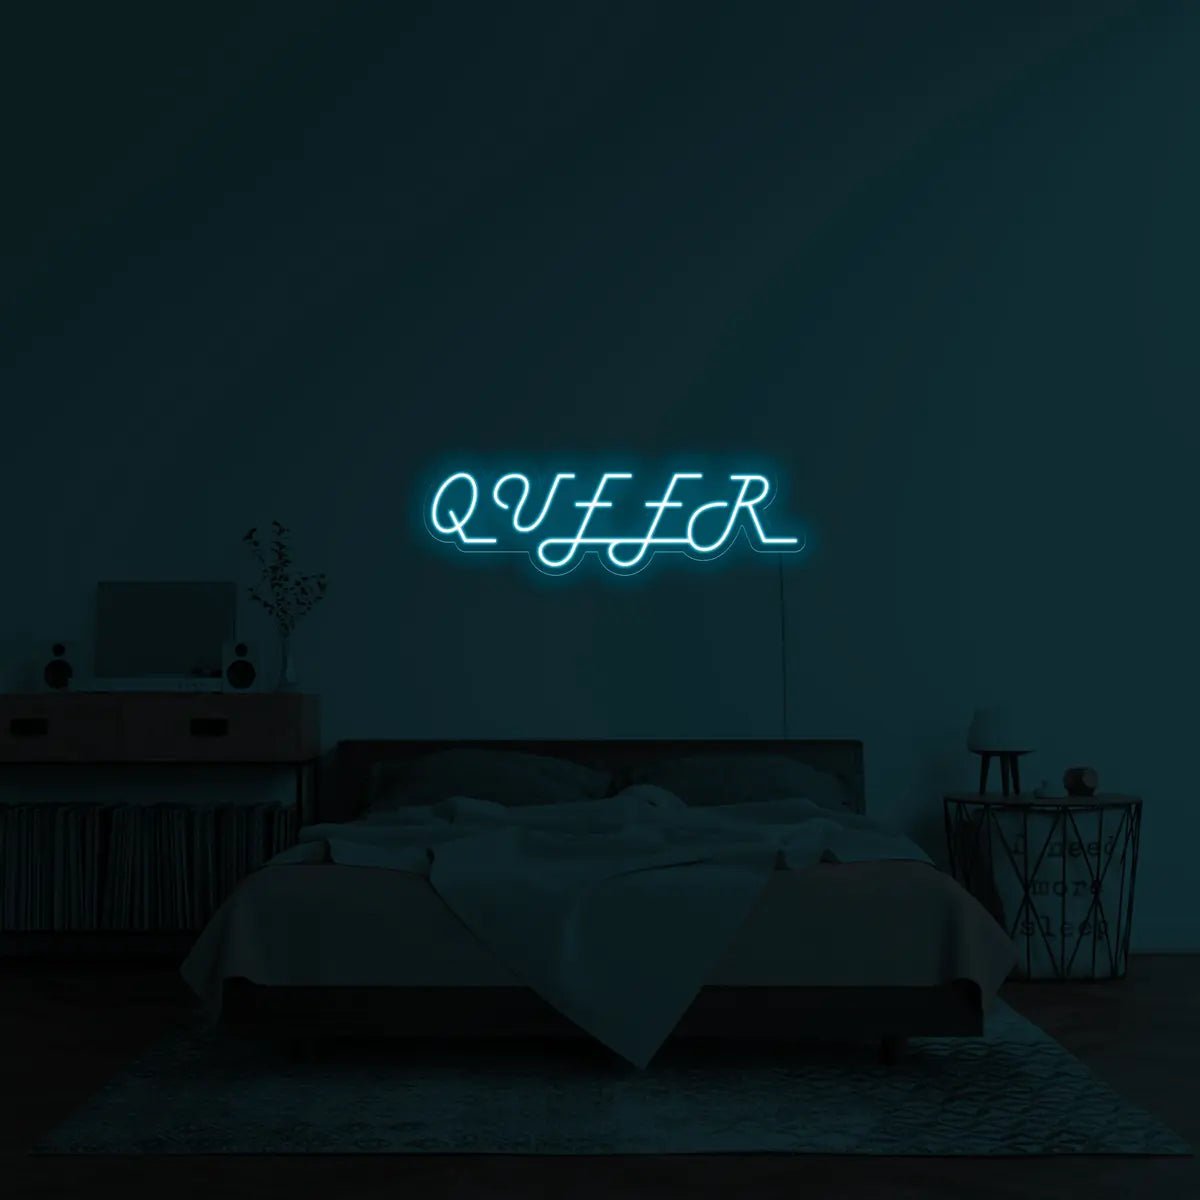 'Queer' LED Neon Sign - neonaffair